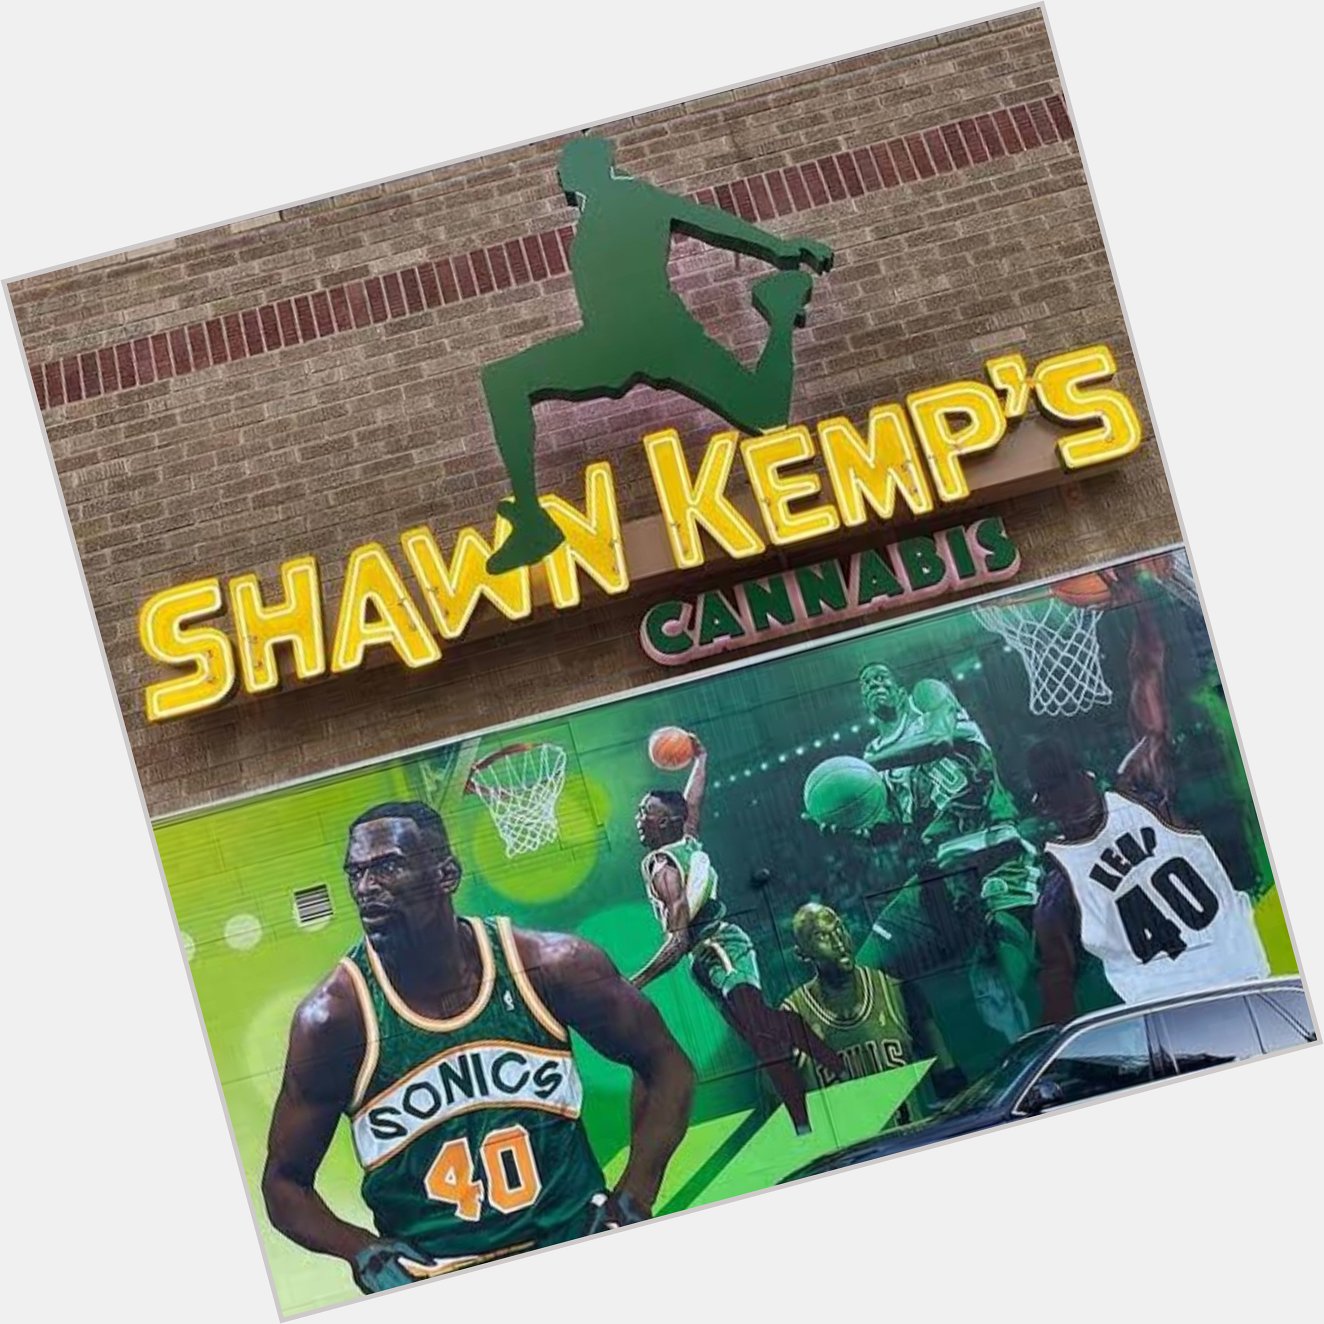 Happy birthday Shawn Kemp I hope I get to visit your weed store one day. 